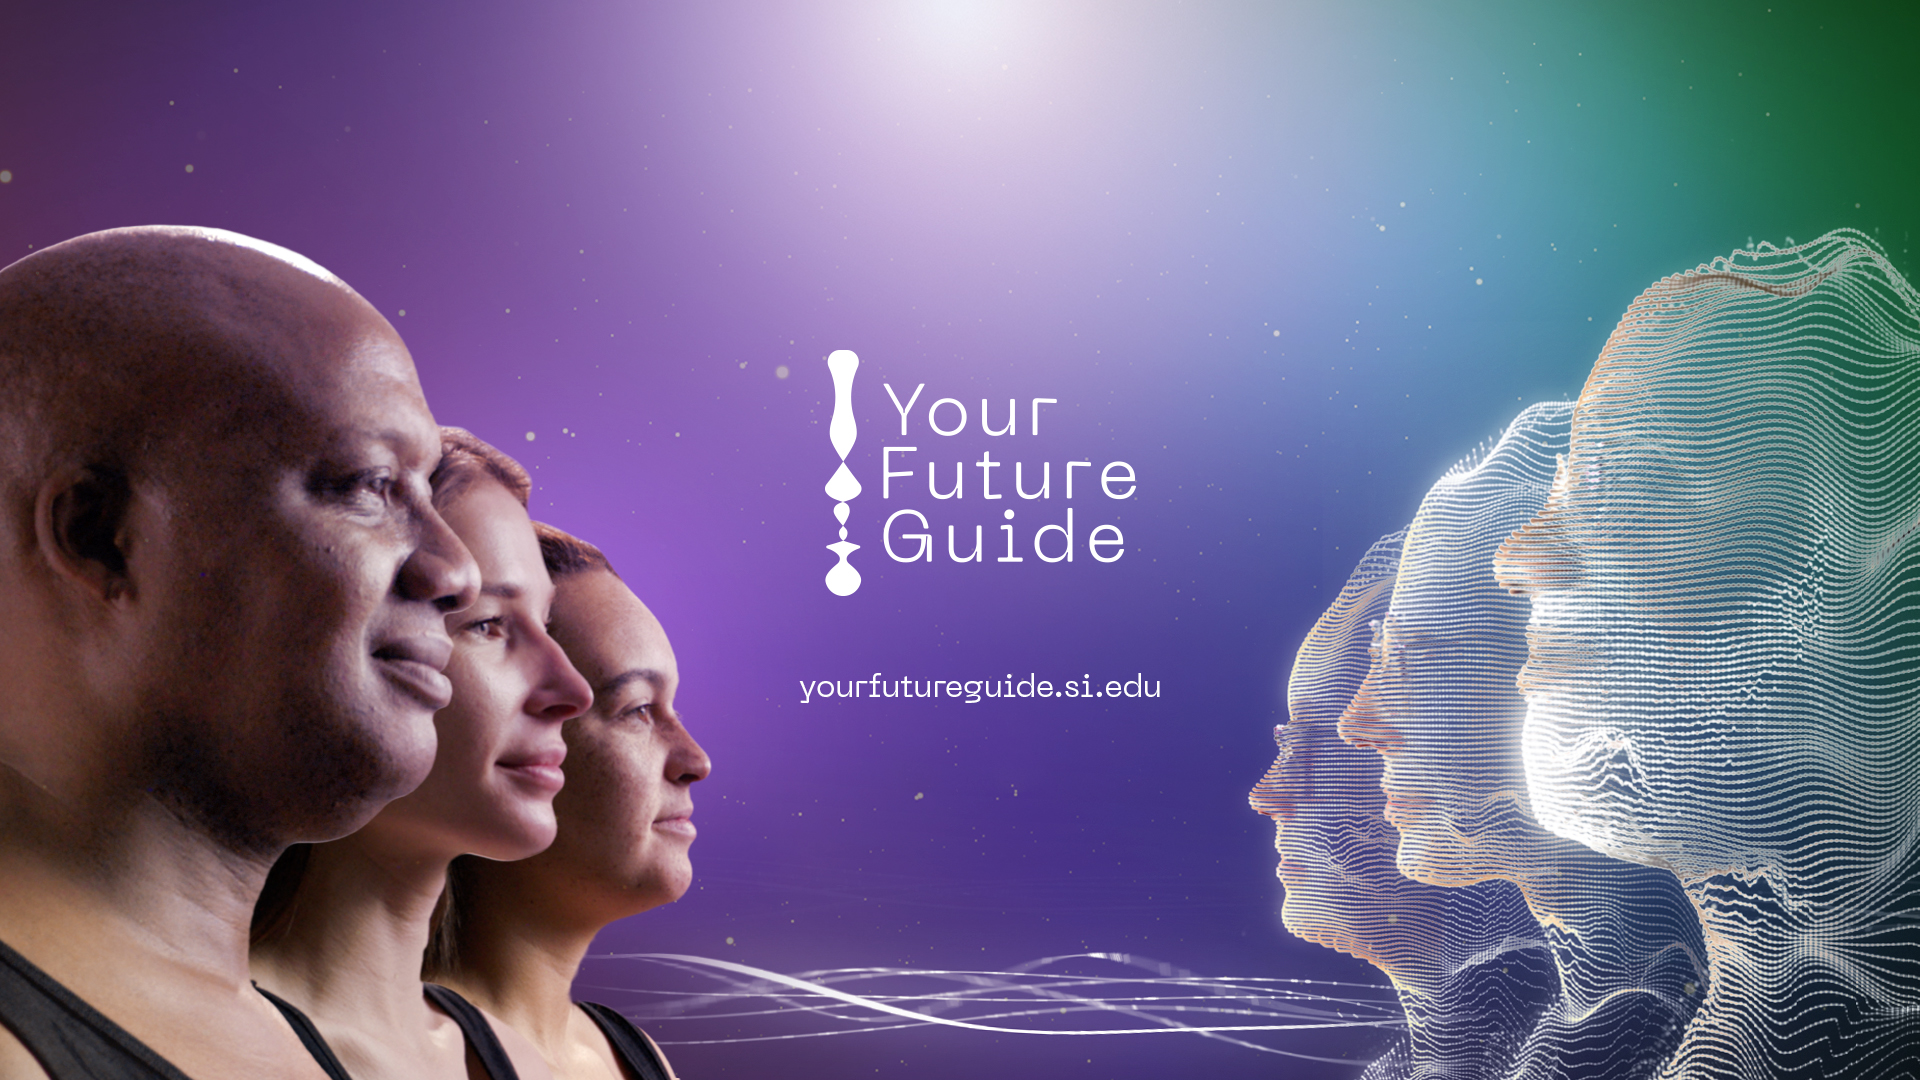 Graphic illustration with two rows of human faces on either side. In center reads "Your Future Guide. yourfututreguide.com"